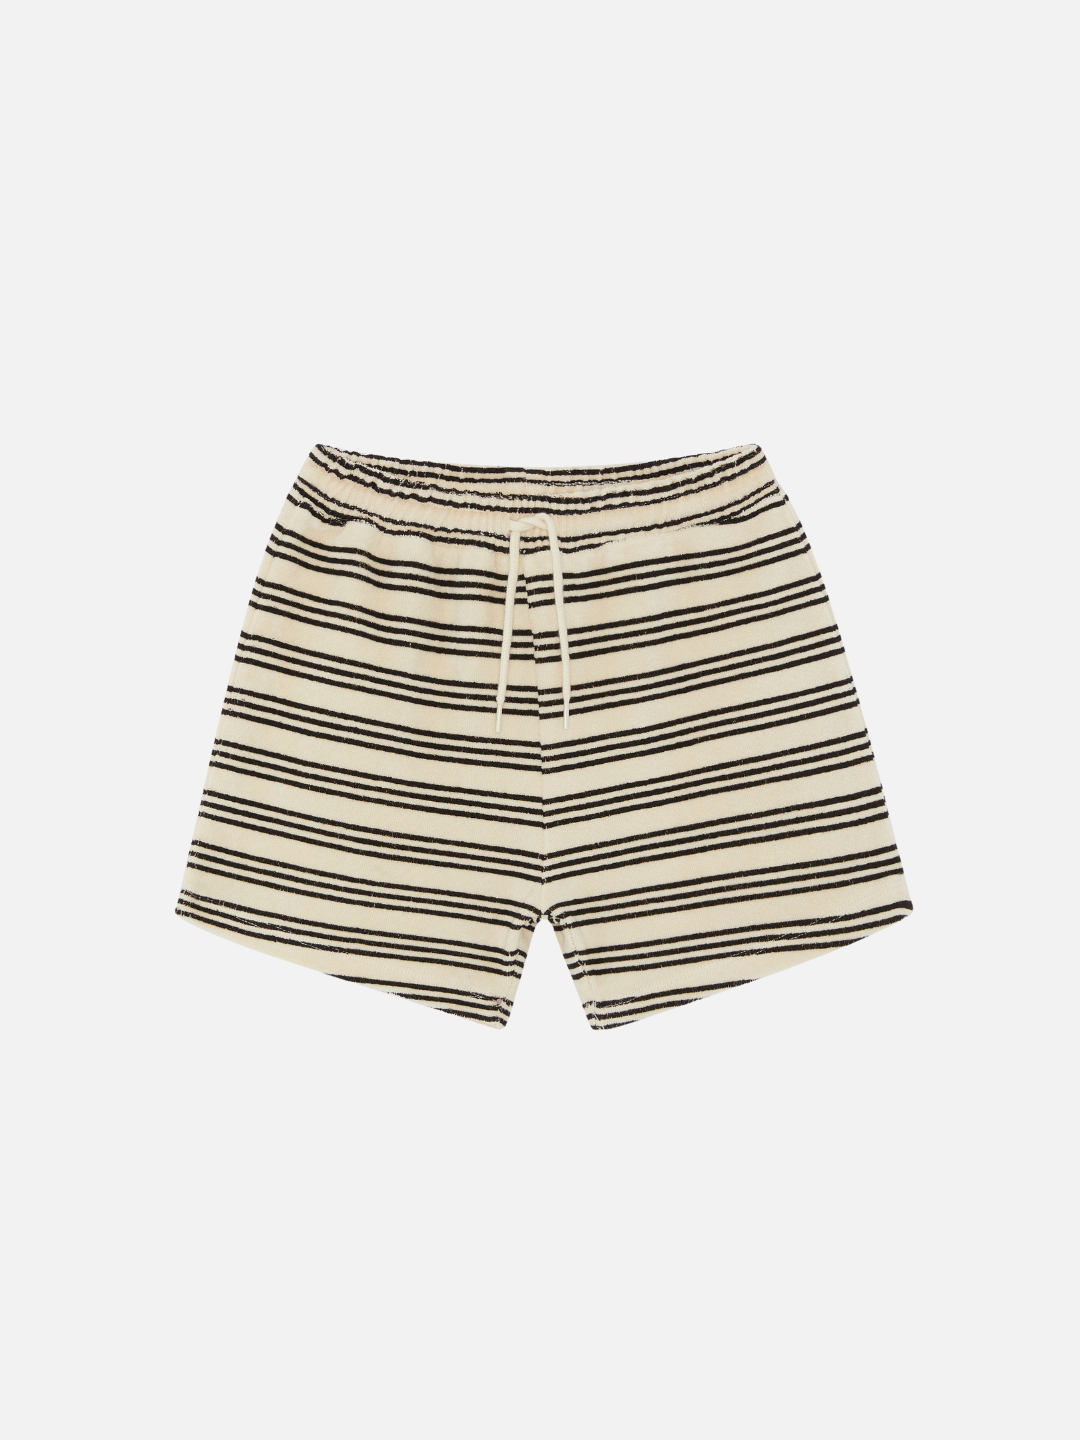 A front view of the kid's terry towel shorts in stripe